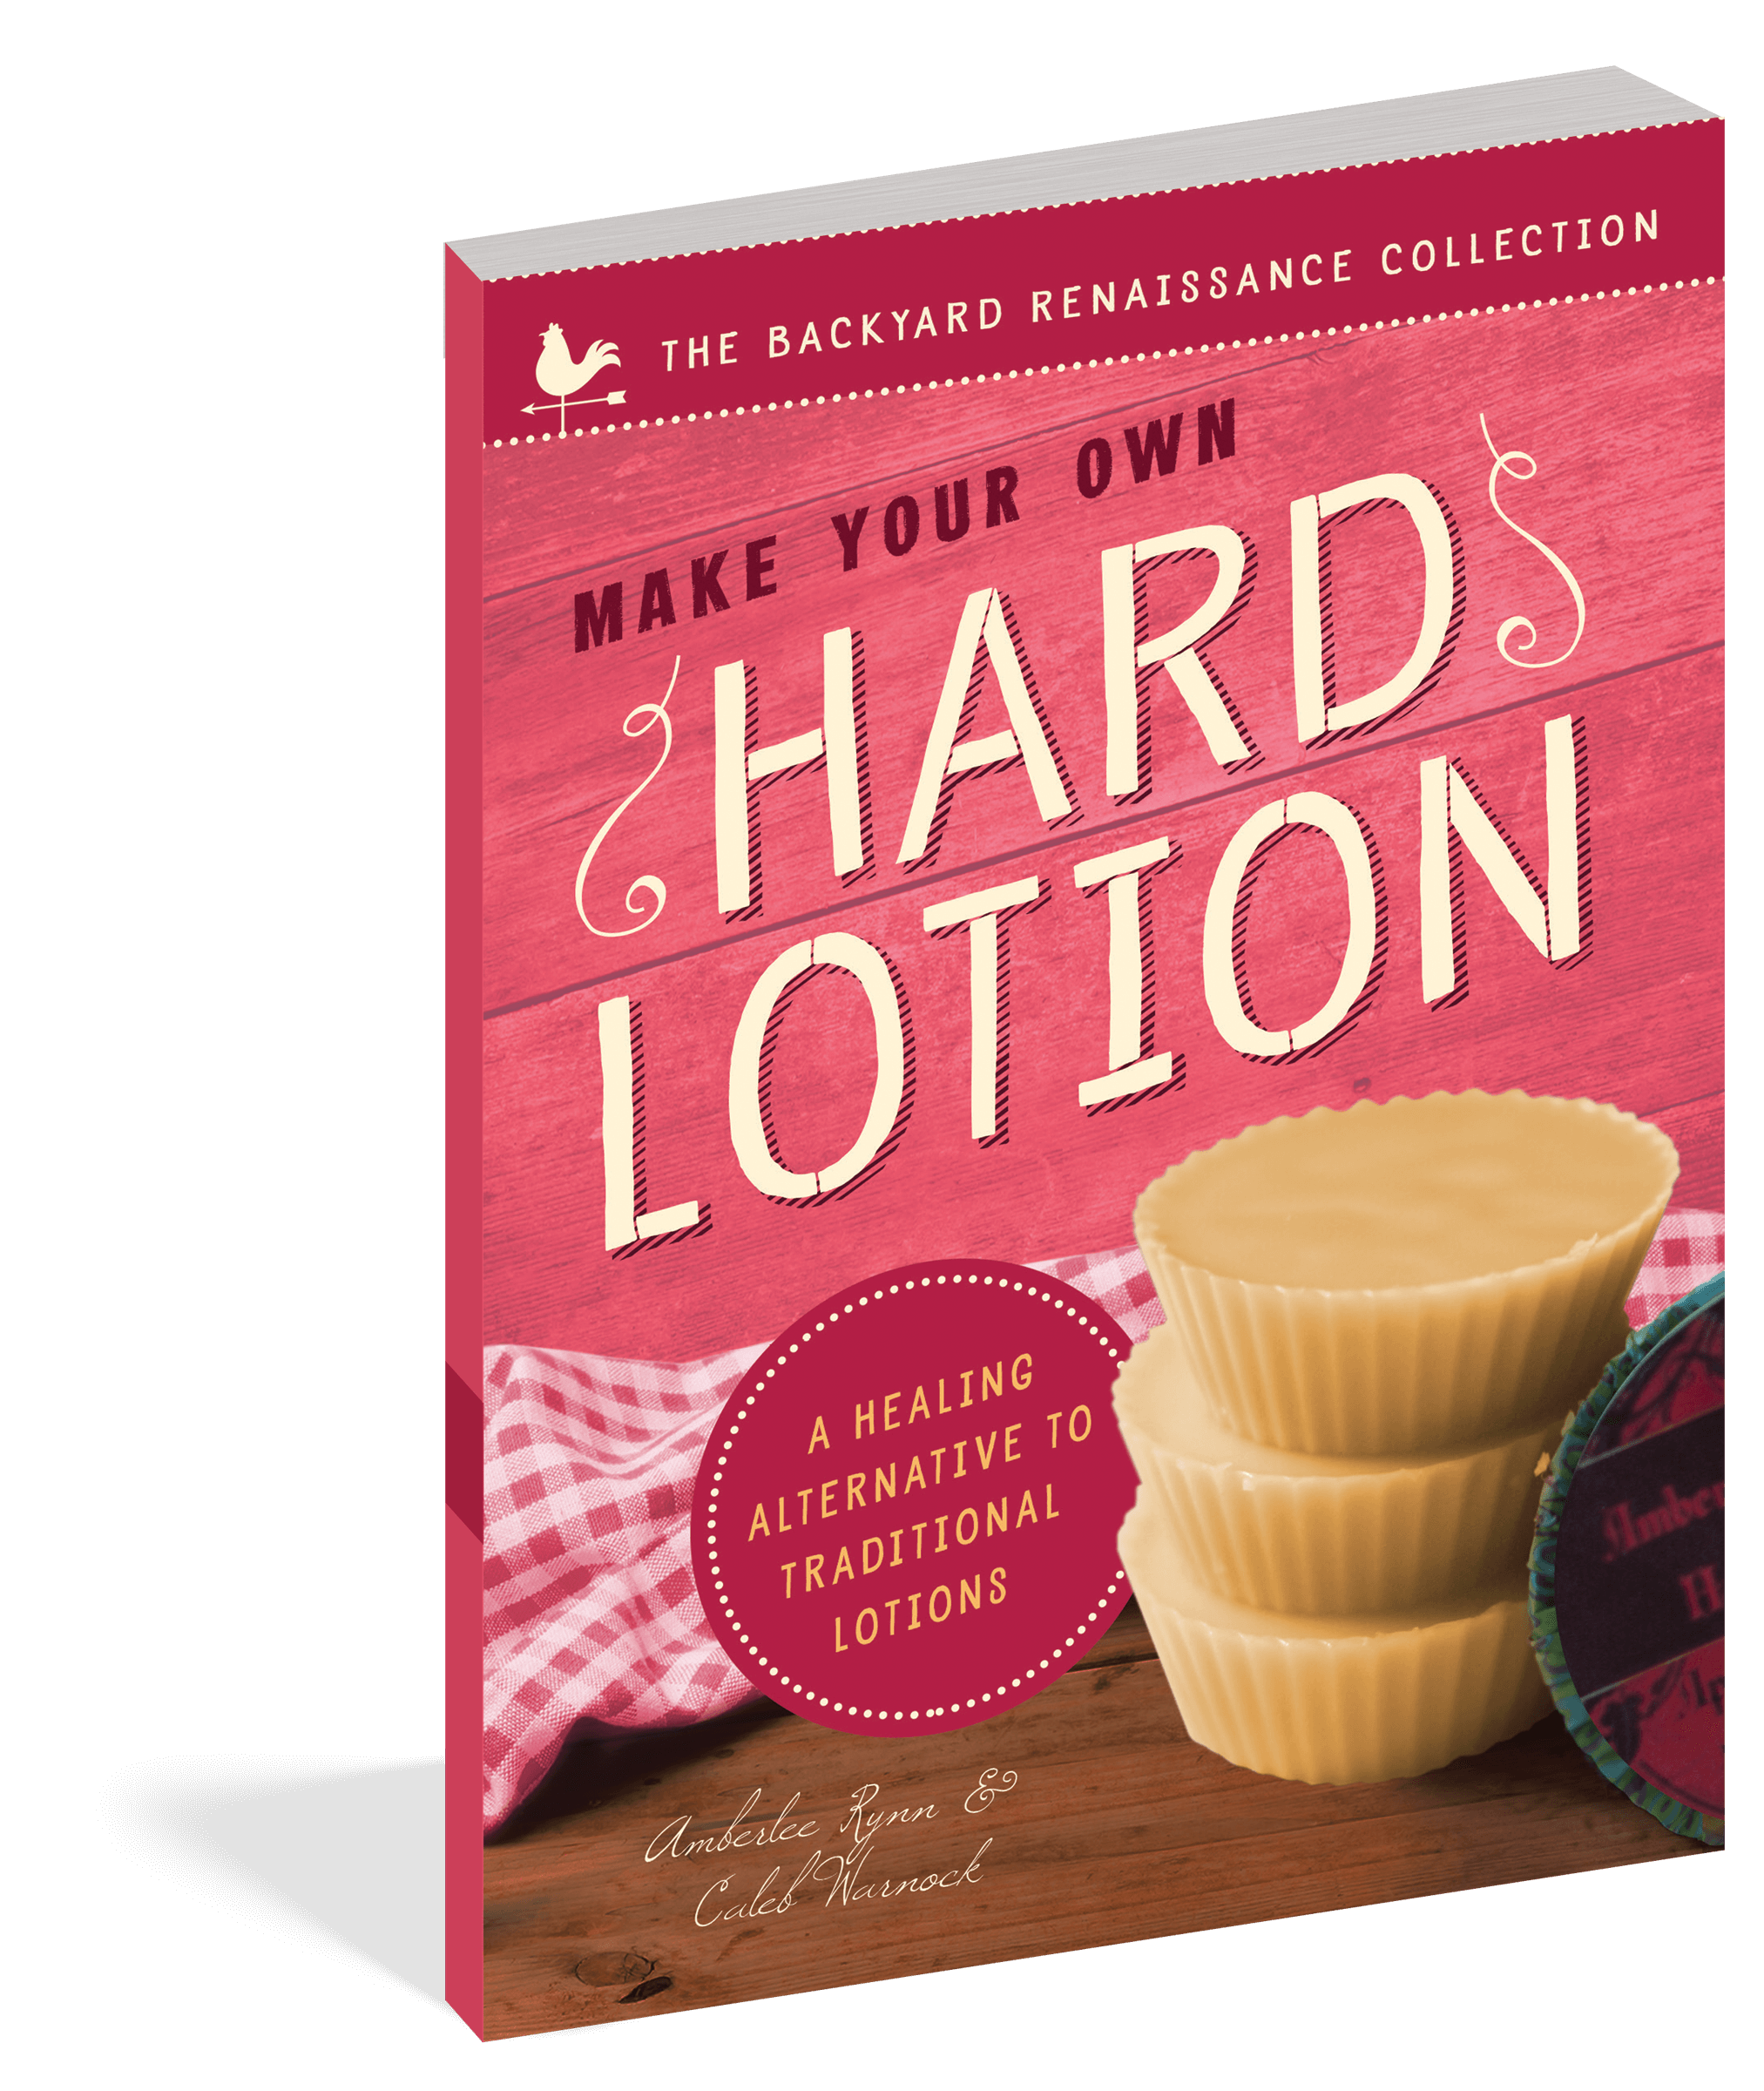 The cover of the book Make Your Own Hard Lotion.